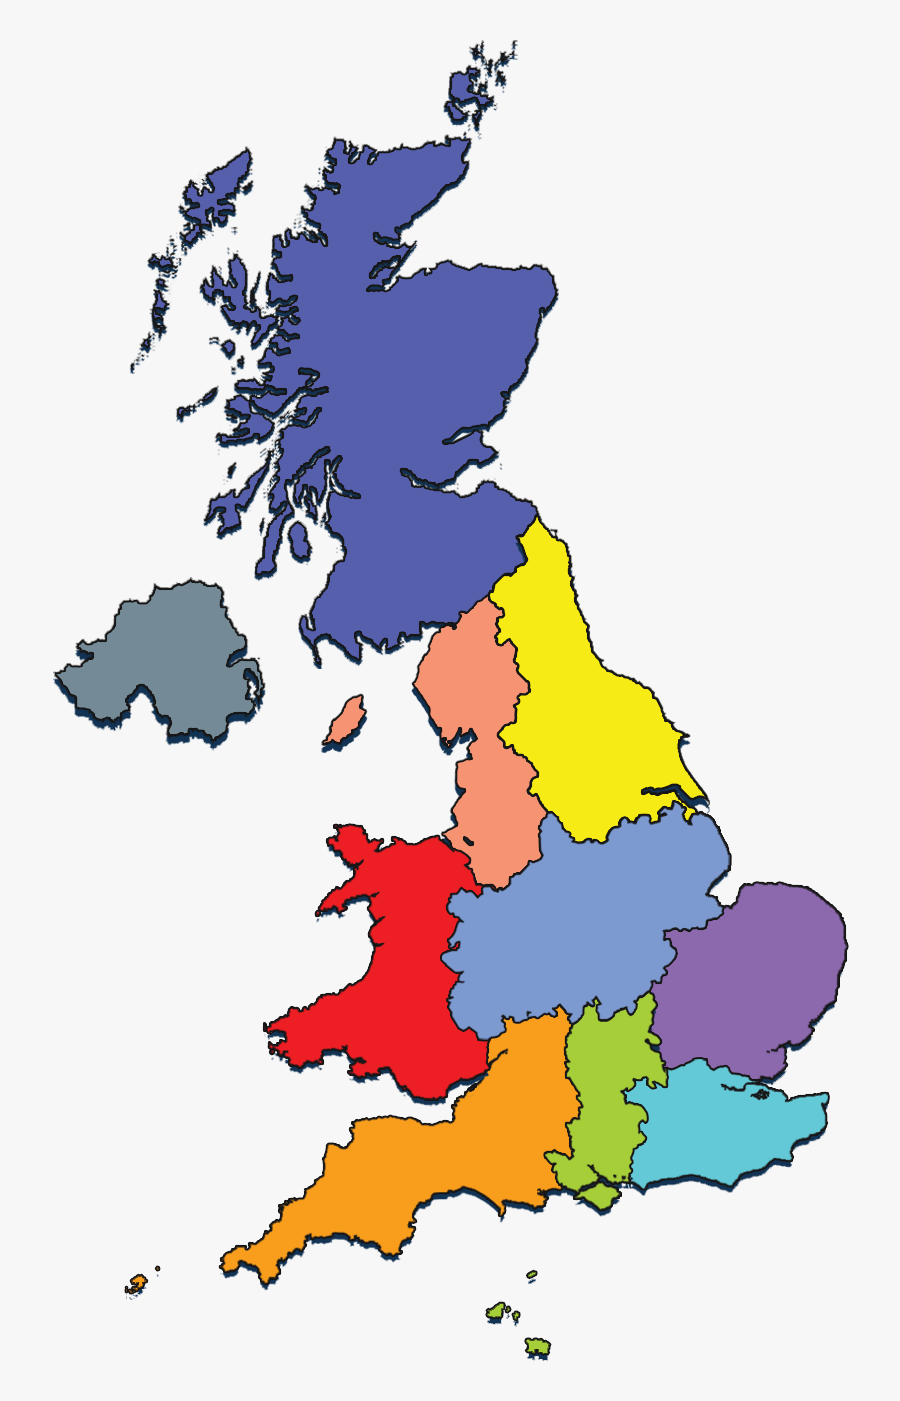 Rya Regions & Home Countries - Watford Gap North South Divide, Transparent Clipart